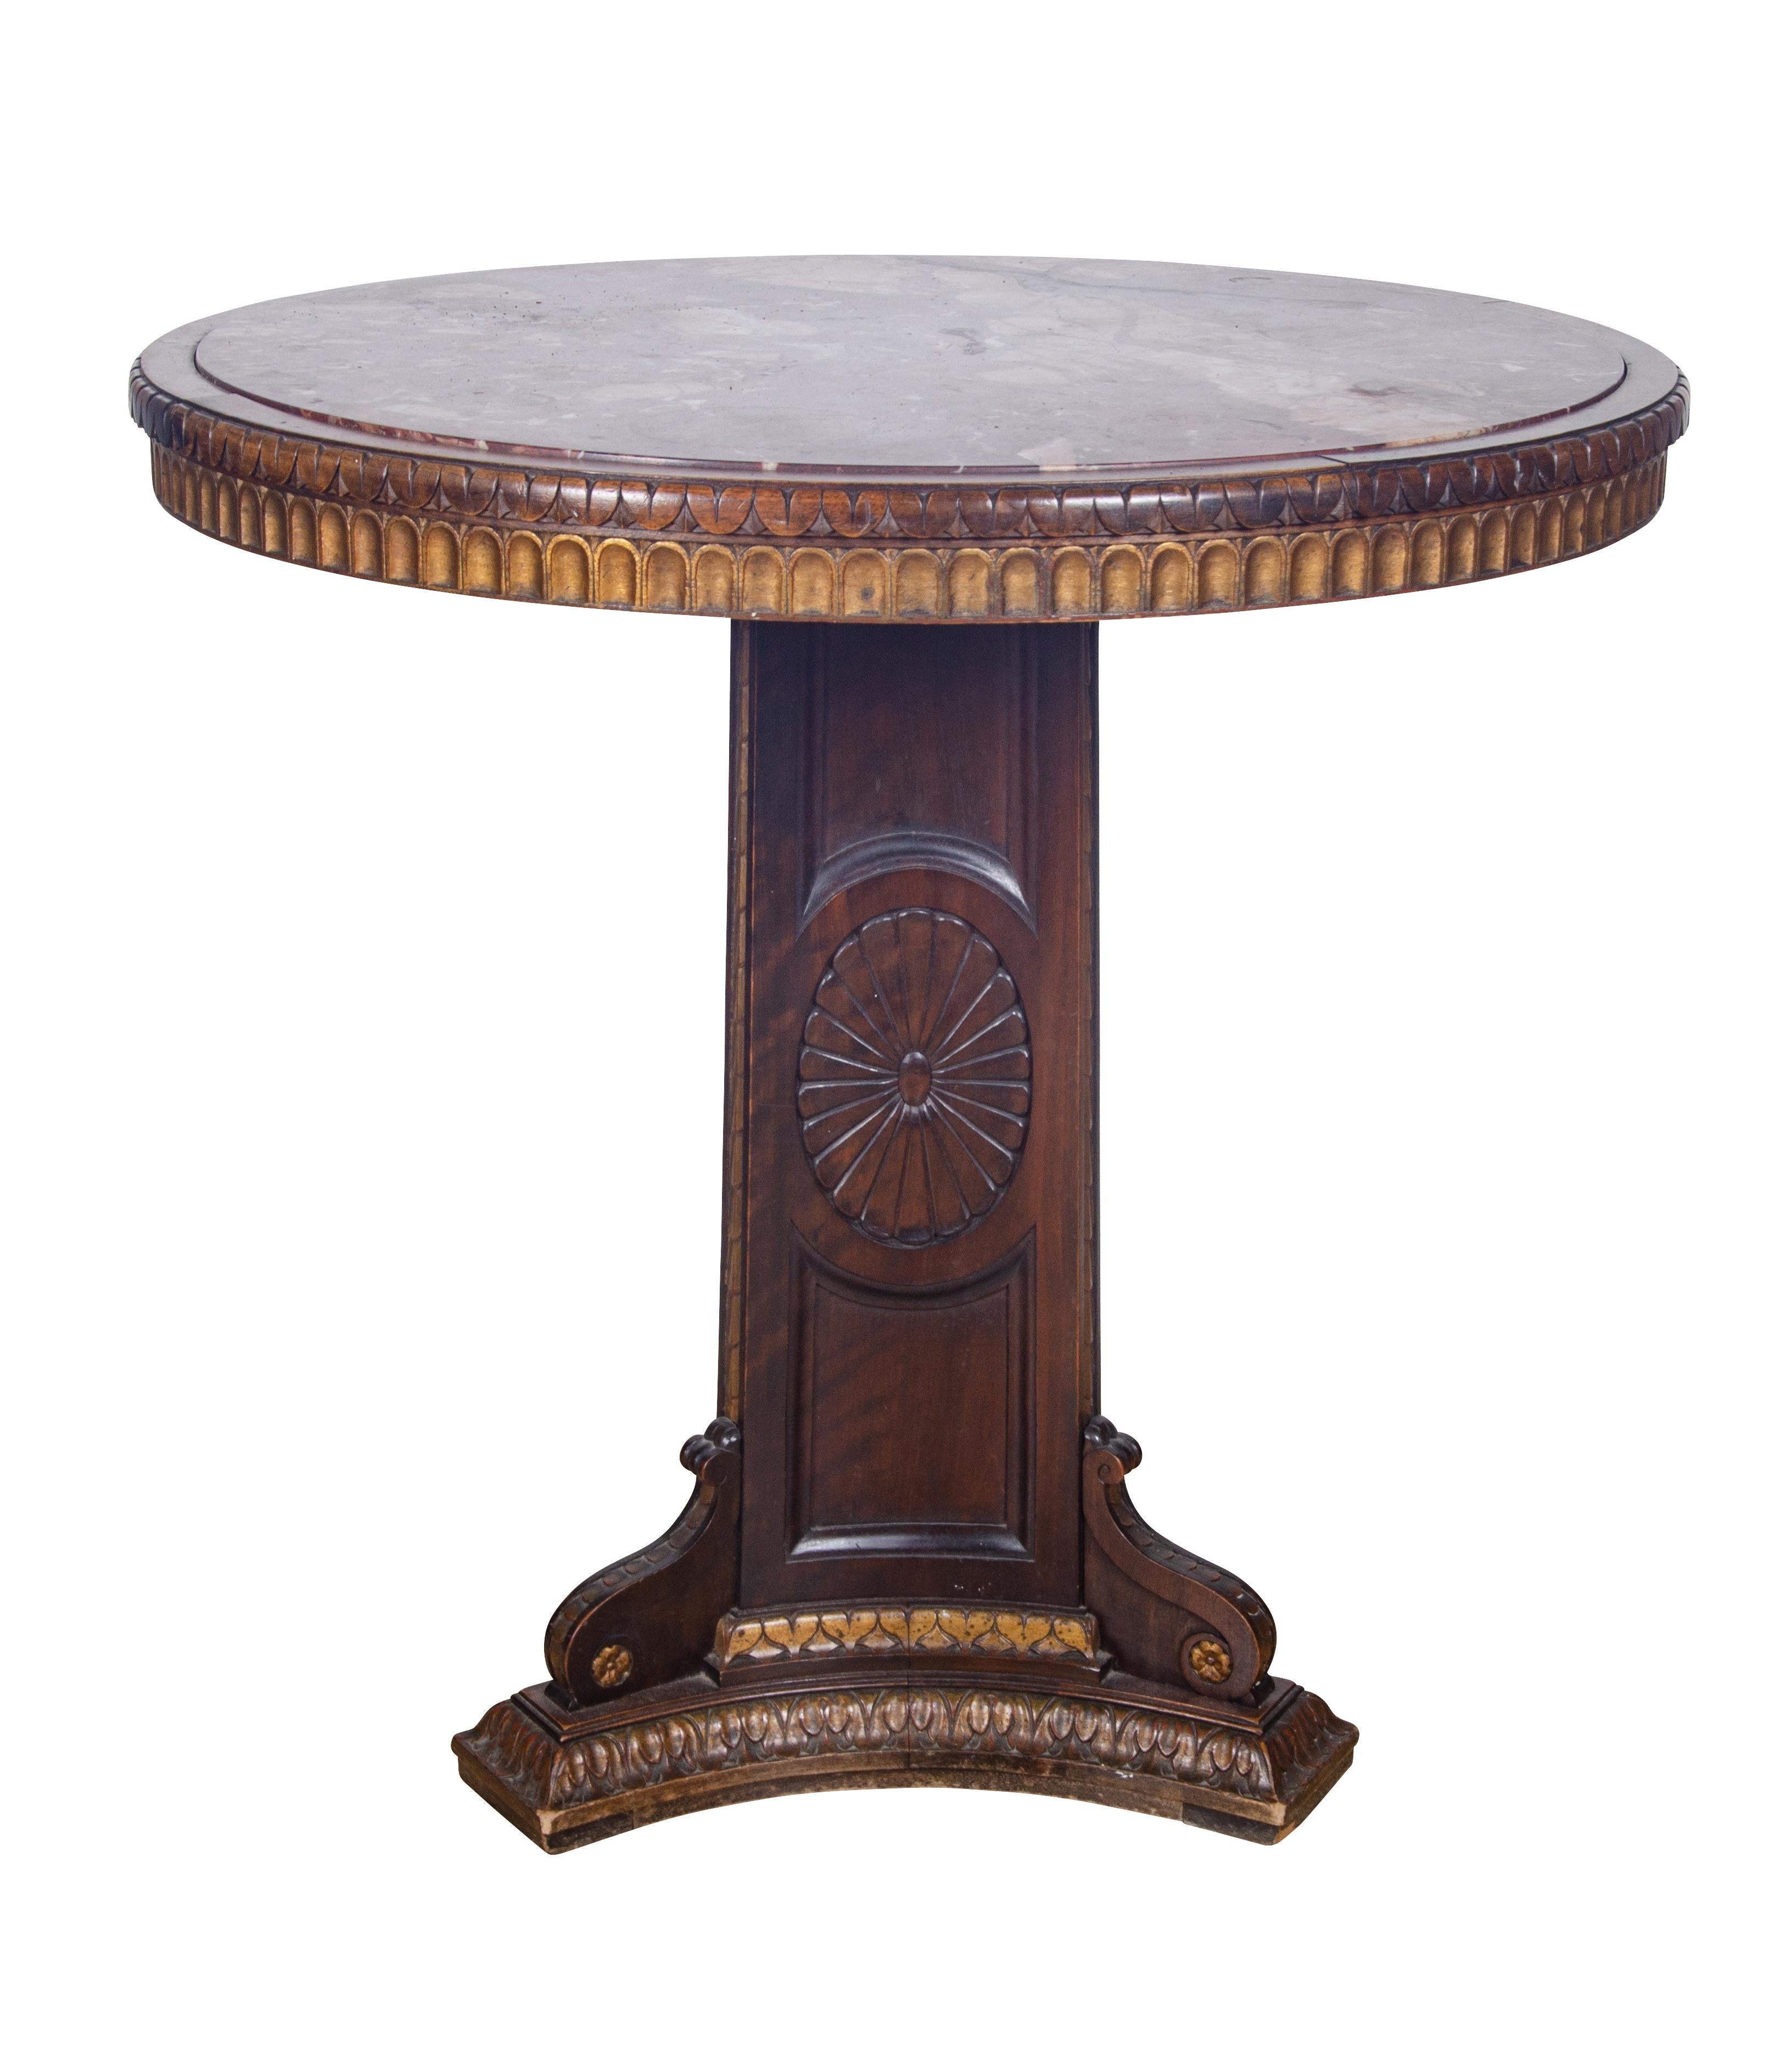 With an inset circular marble top with a rich red color set in a conforming wood border with carved details , the base carved and with subtle gilded details and triangular shaped base.